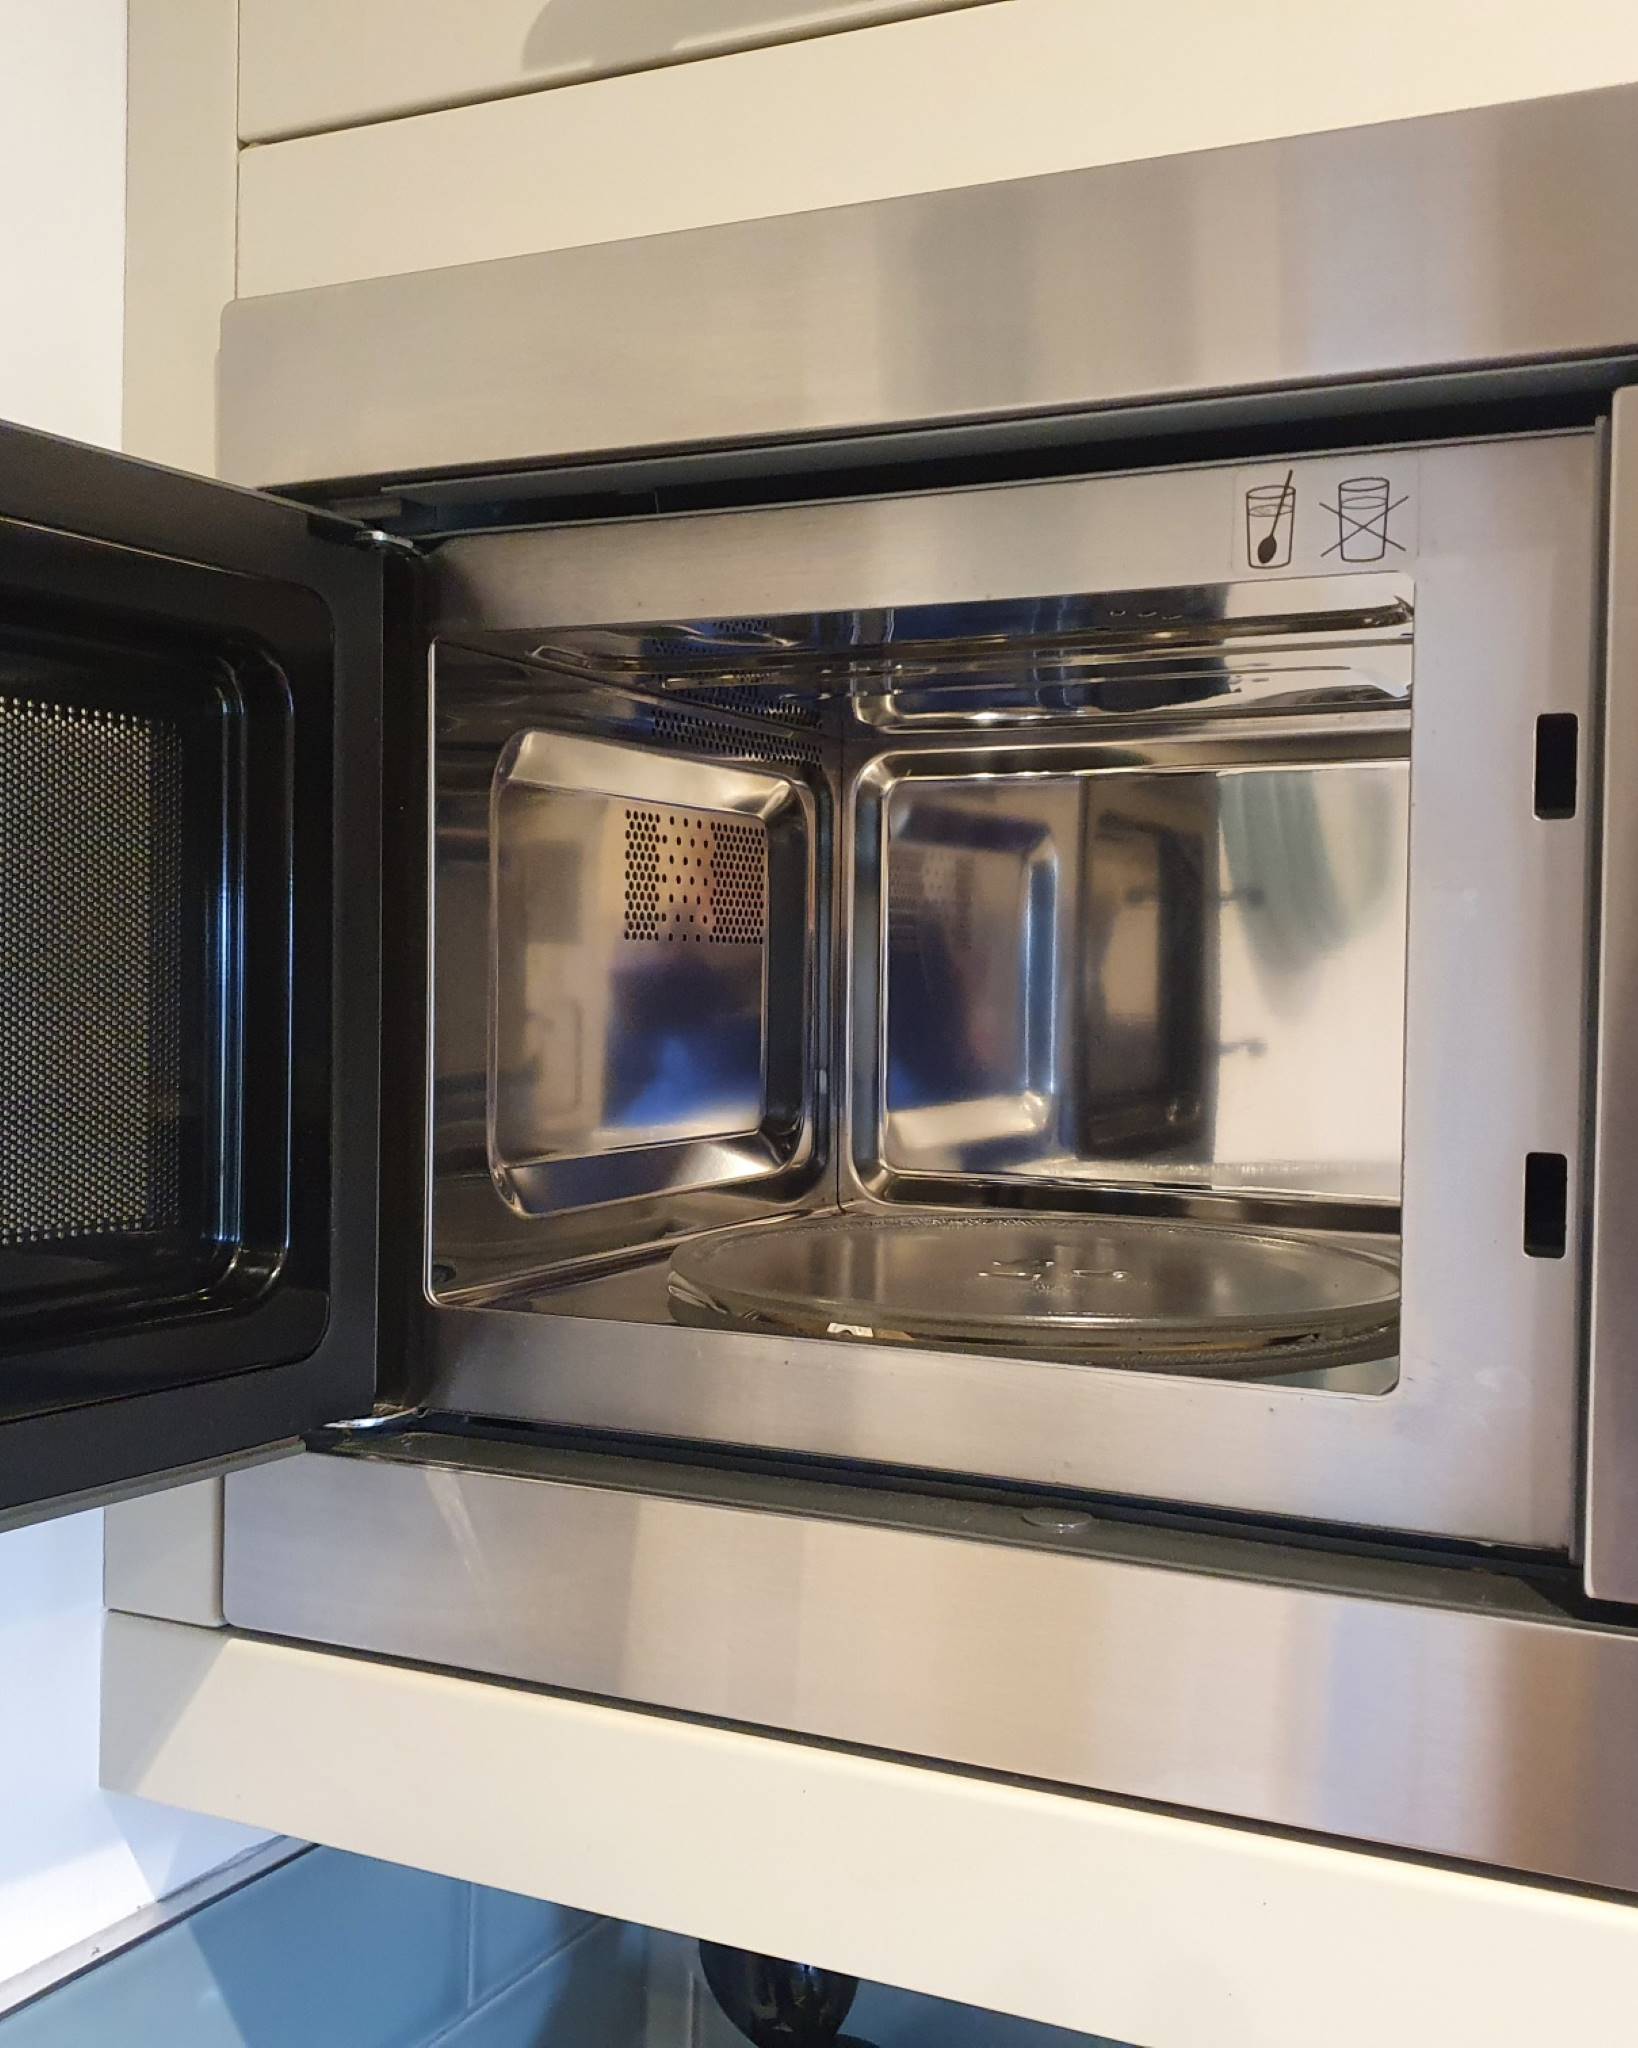 Microwave Cleaning | Clean Oven Belfast | Oven Cleaning NI | Oven Clean ni | Kitchen Cleaning NI | Oven Cleaning Belfast | Kitchen Appliance Cleaning Belfast | Oven Clean NI